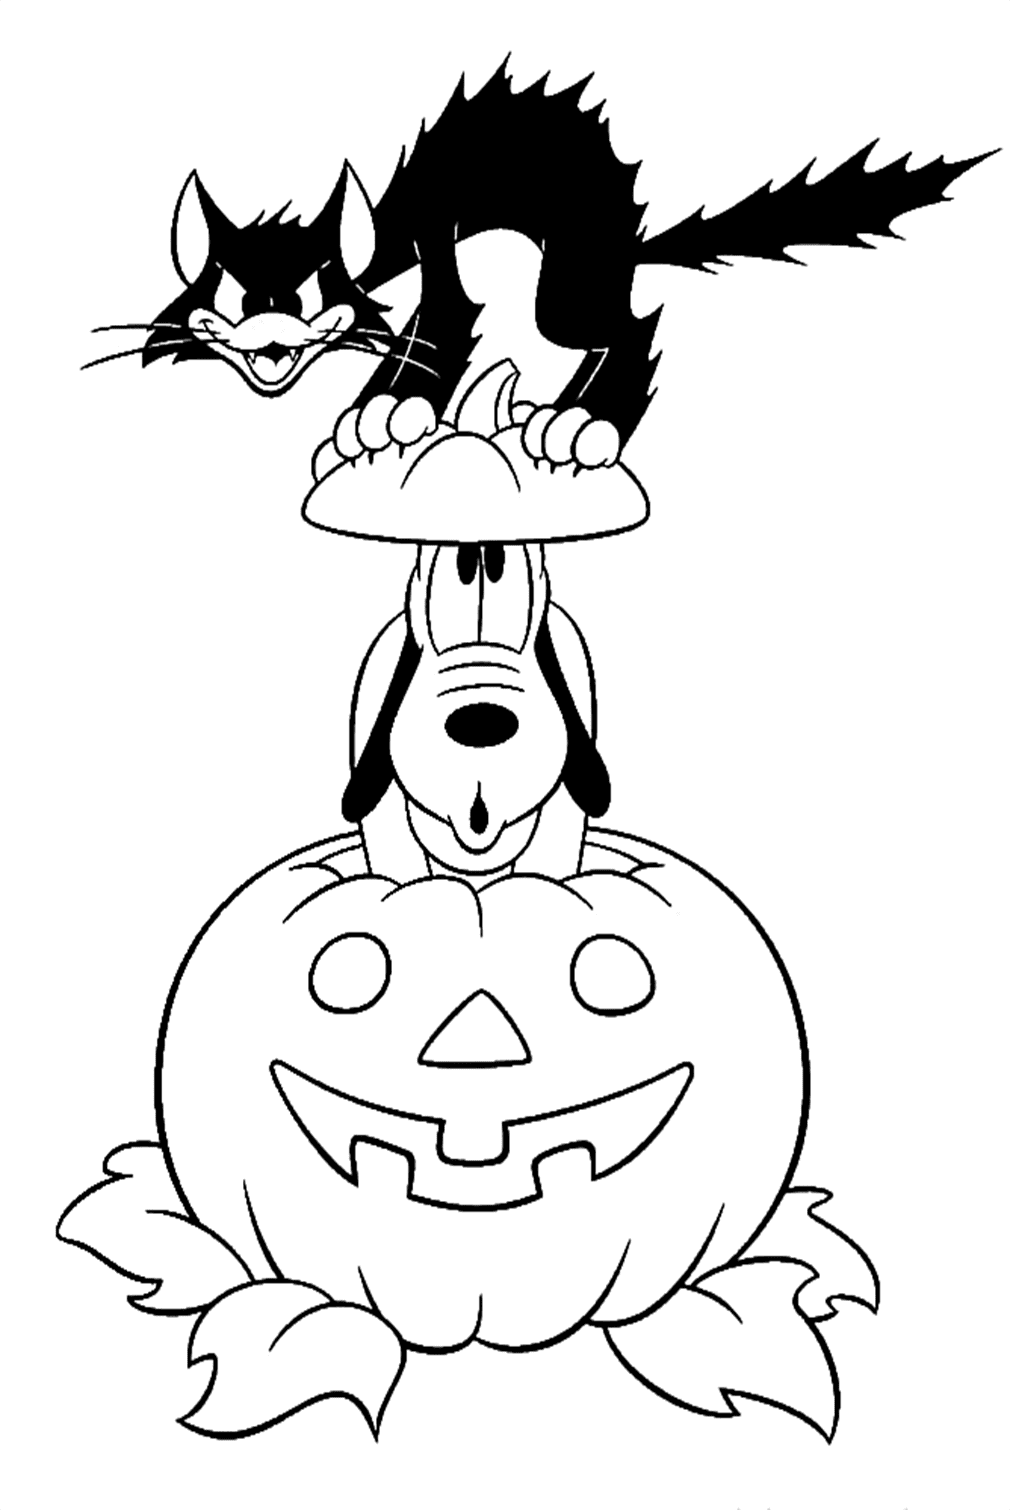 Halloween Pluto Black Cat Coloring Pages